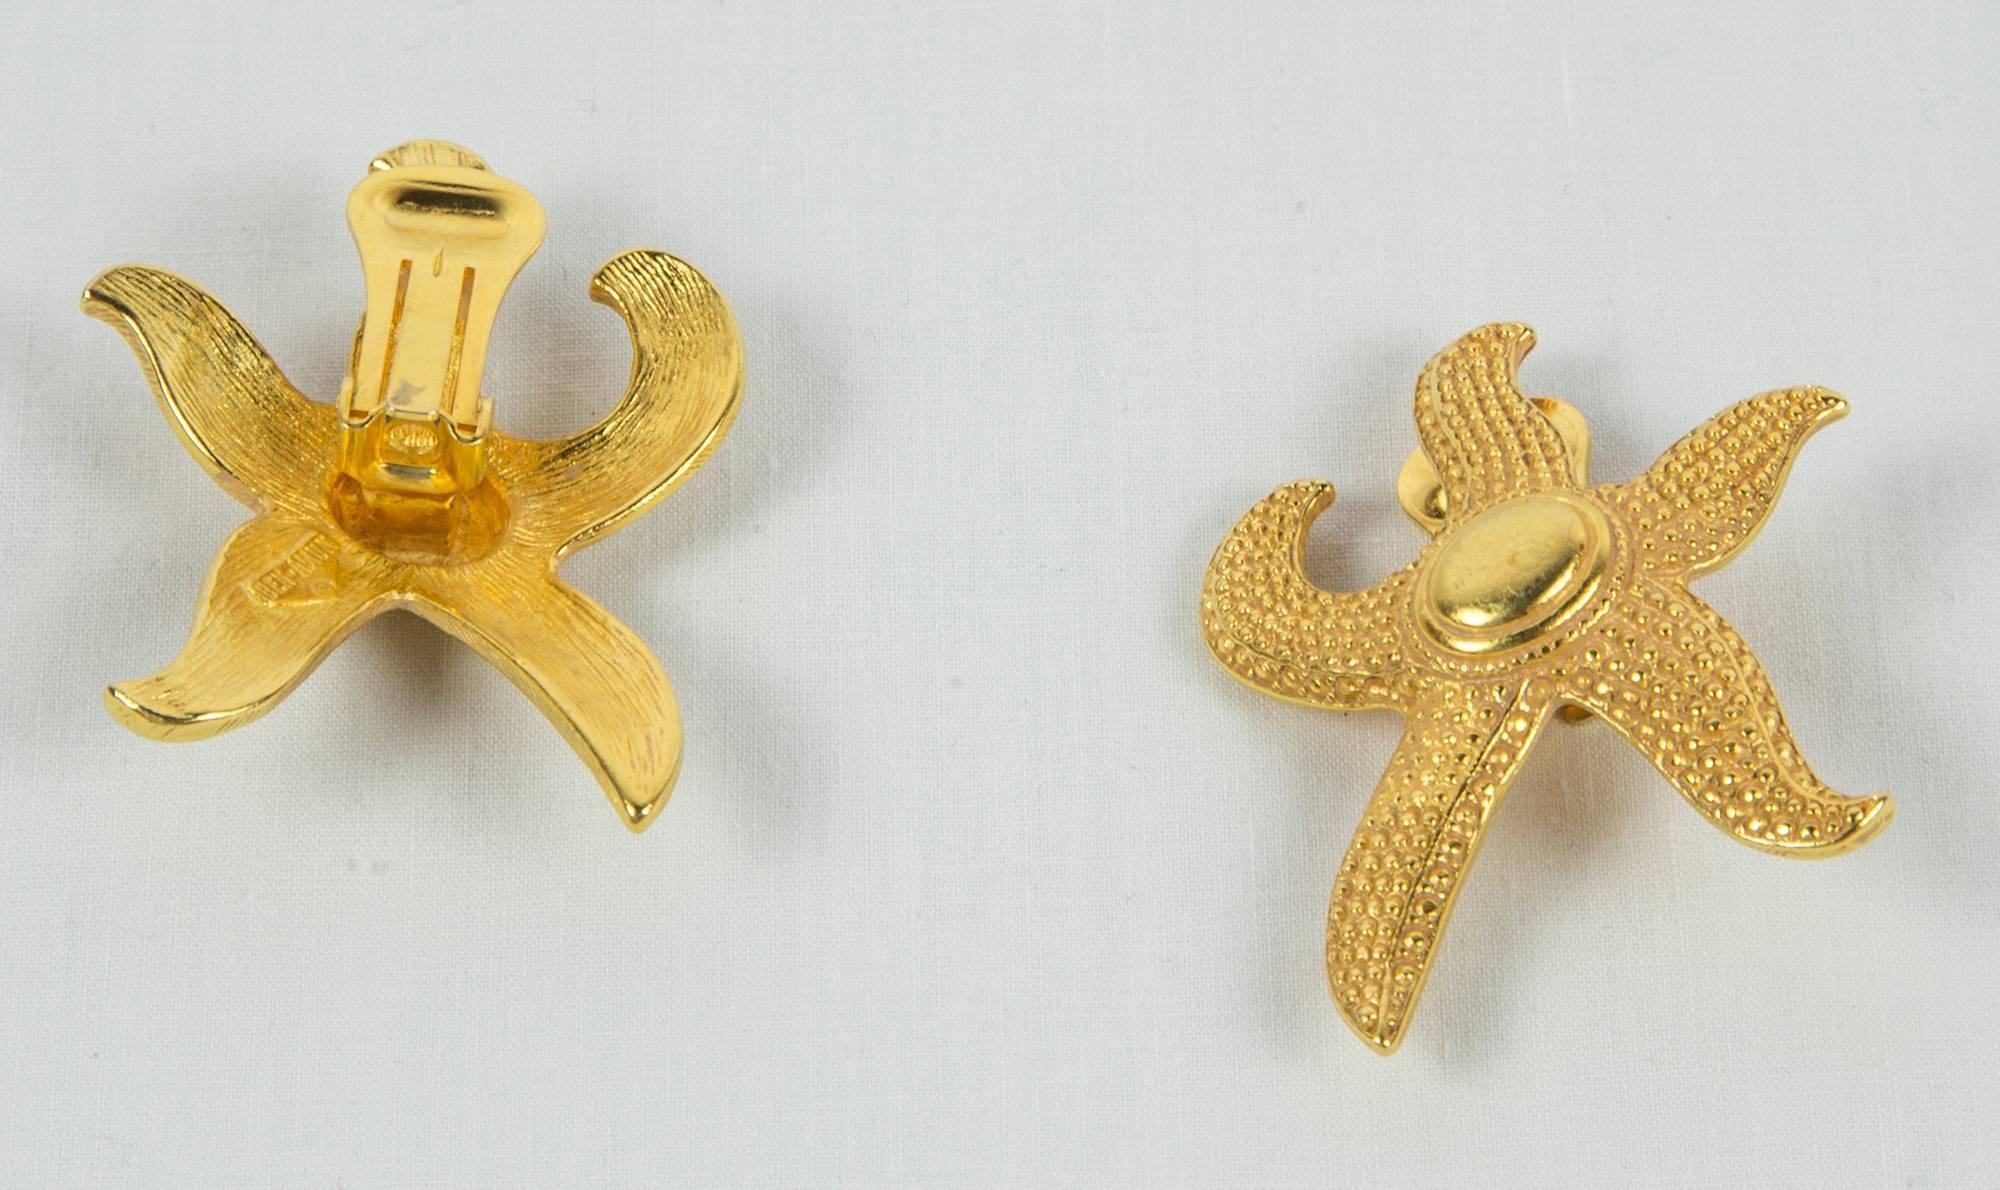 Exceptional statement ear clips in large Starfish design, signed BEN-AMUN.  Intricately textured rich 'ancient-gold’ gilt metal work. Each earring is signed on the underside. Nothing short of jaw-dropping and drool worthy.  Clips both secure and in